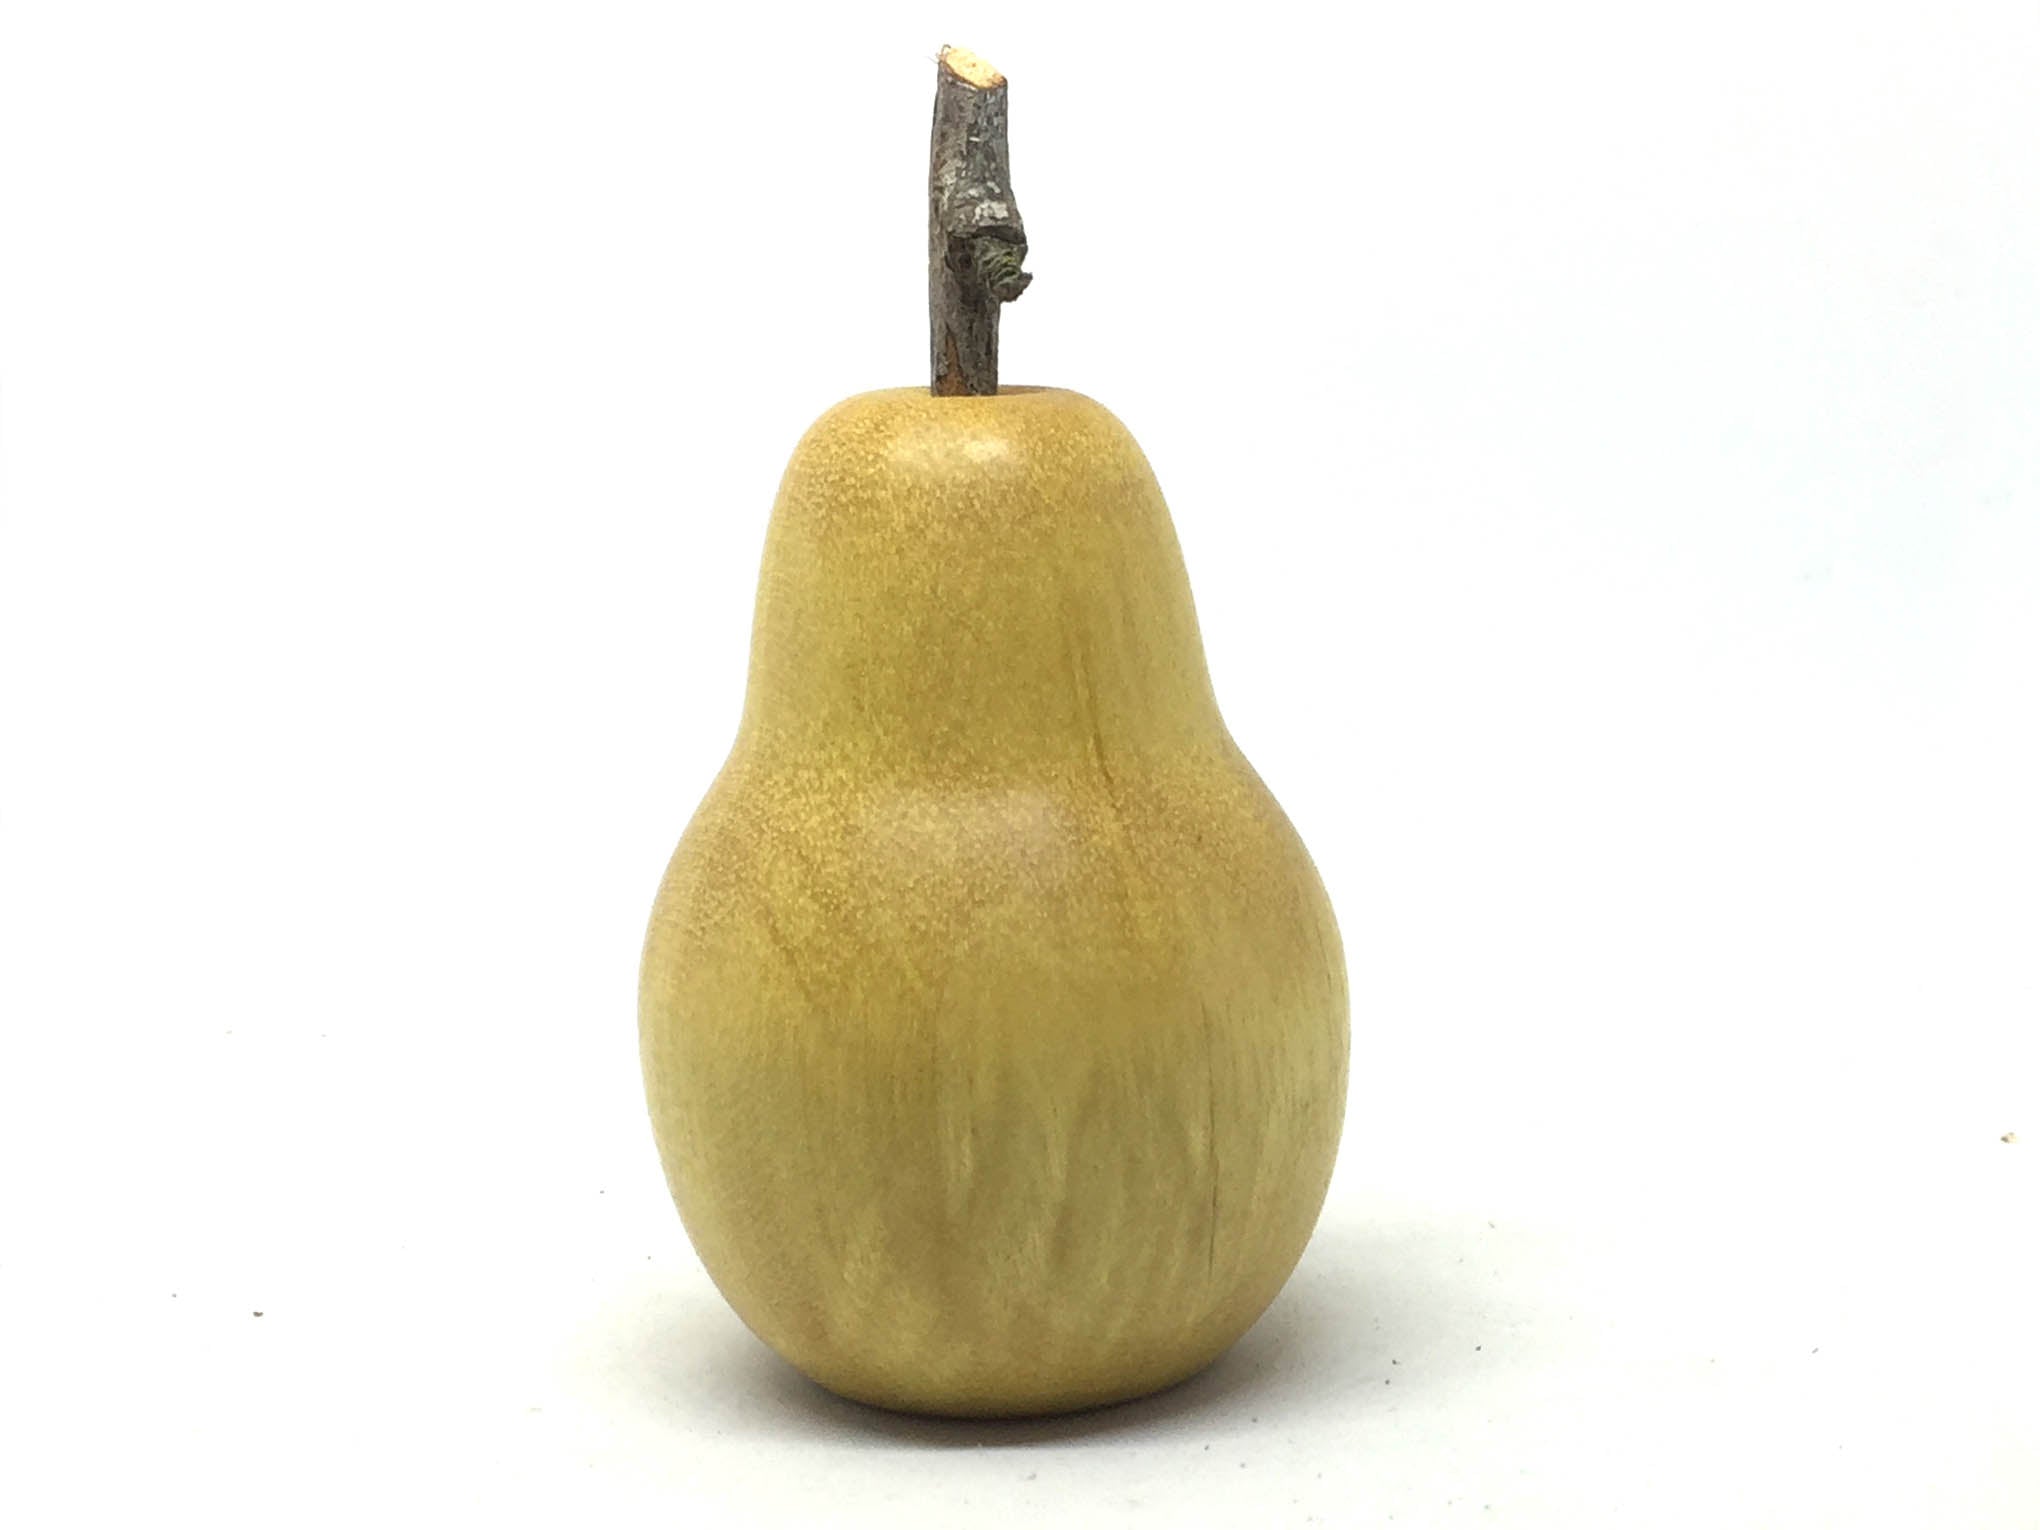 LV-4961  Hand Turned Pear Shaped Salt & Pepper Shaker, Secret Compartment from Yellowheart Wood